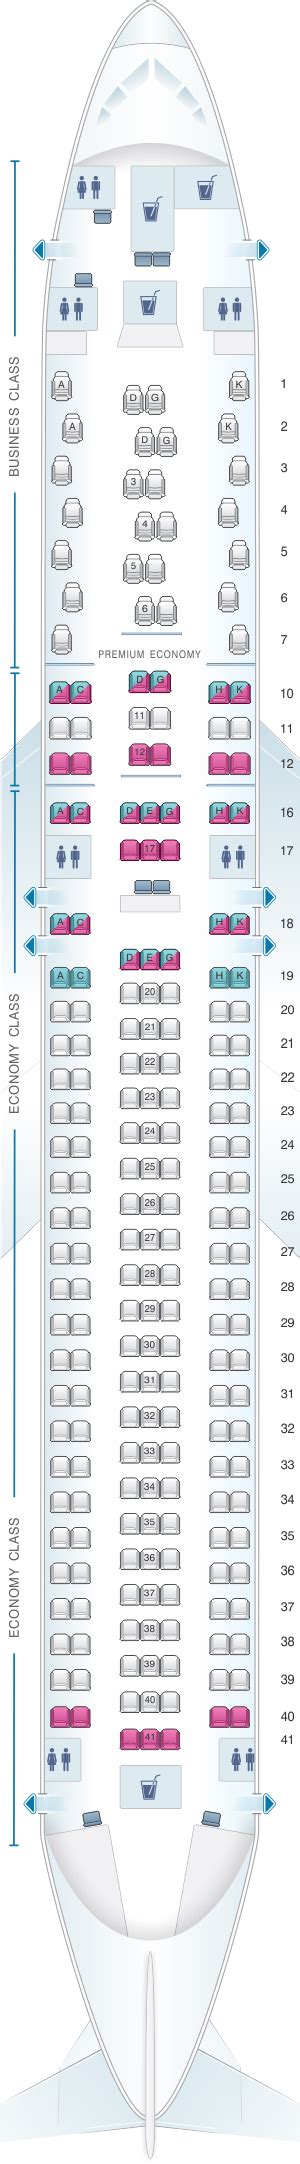 Austrian Airlines Seat Map A320